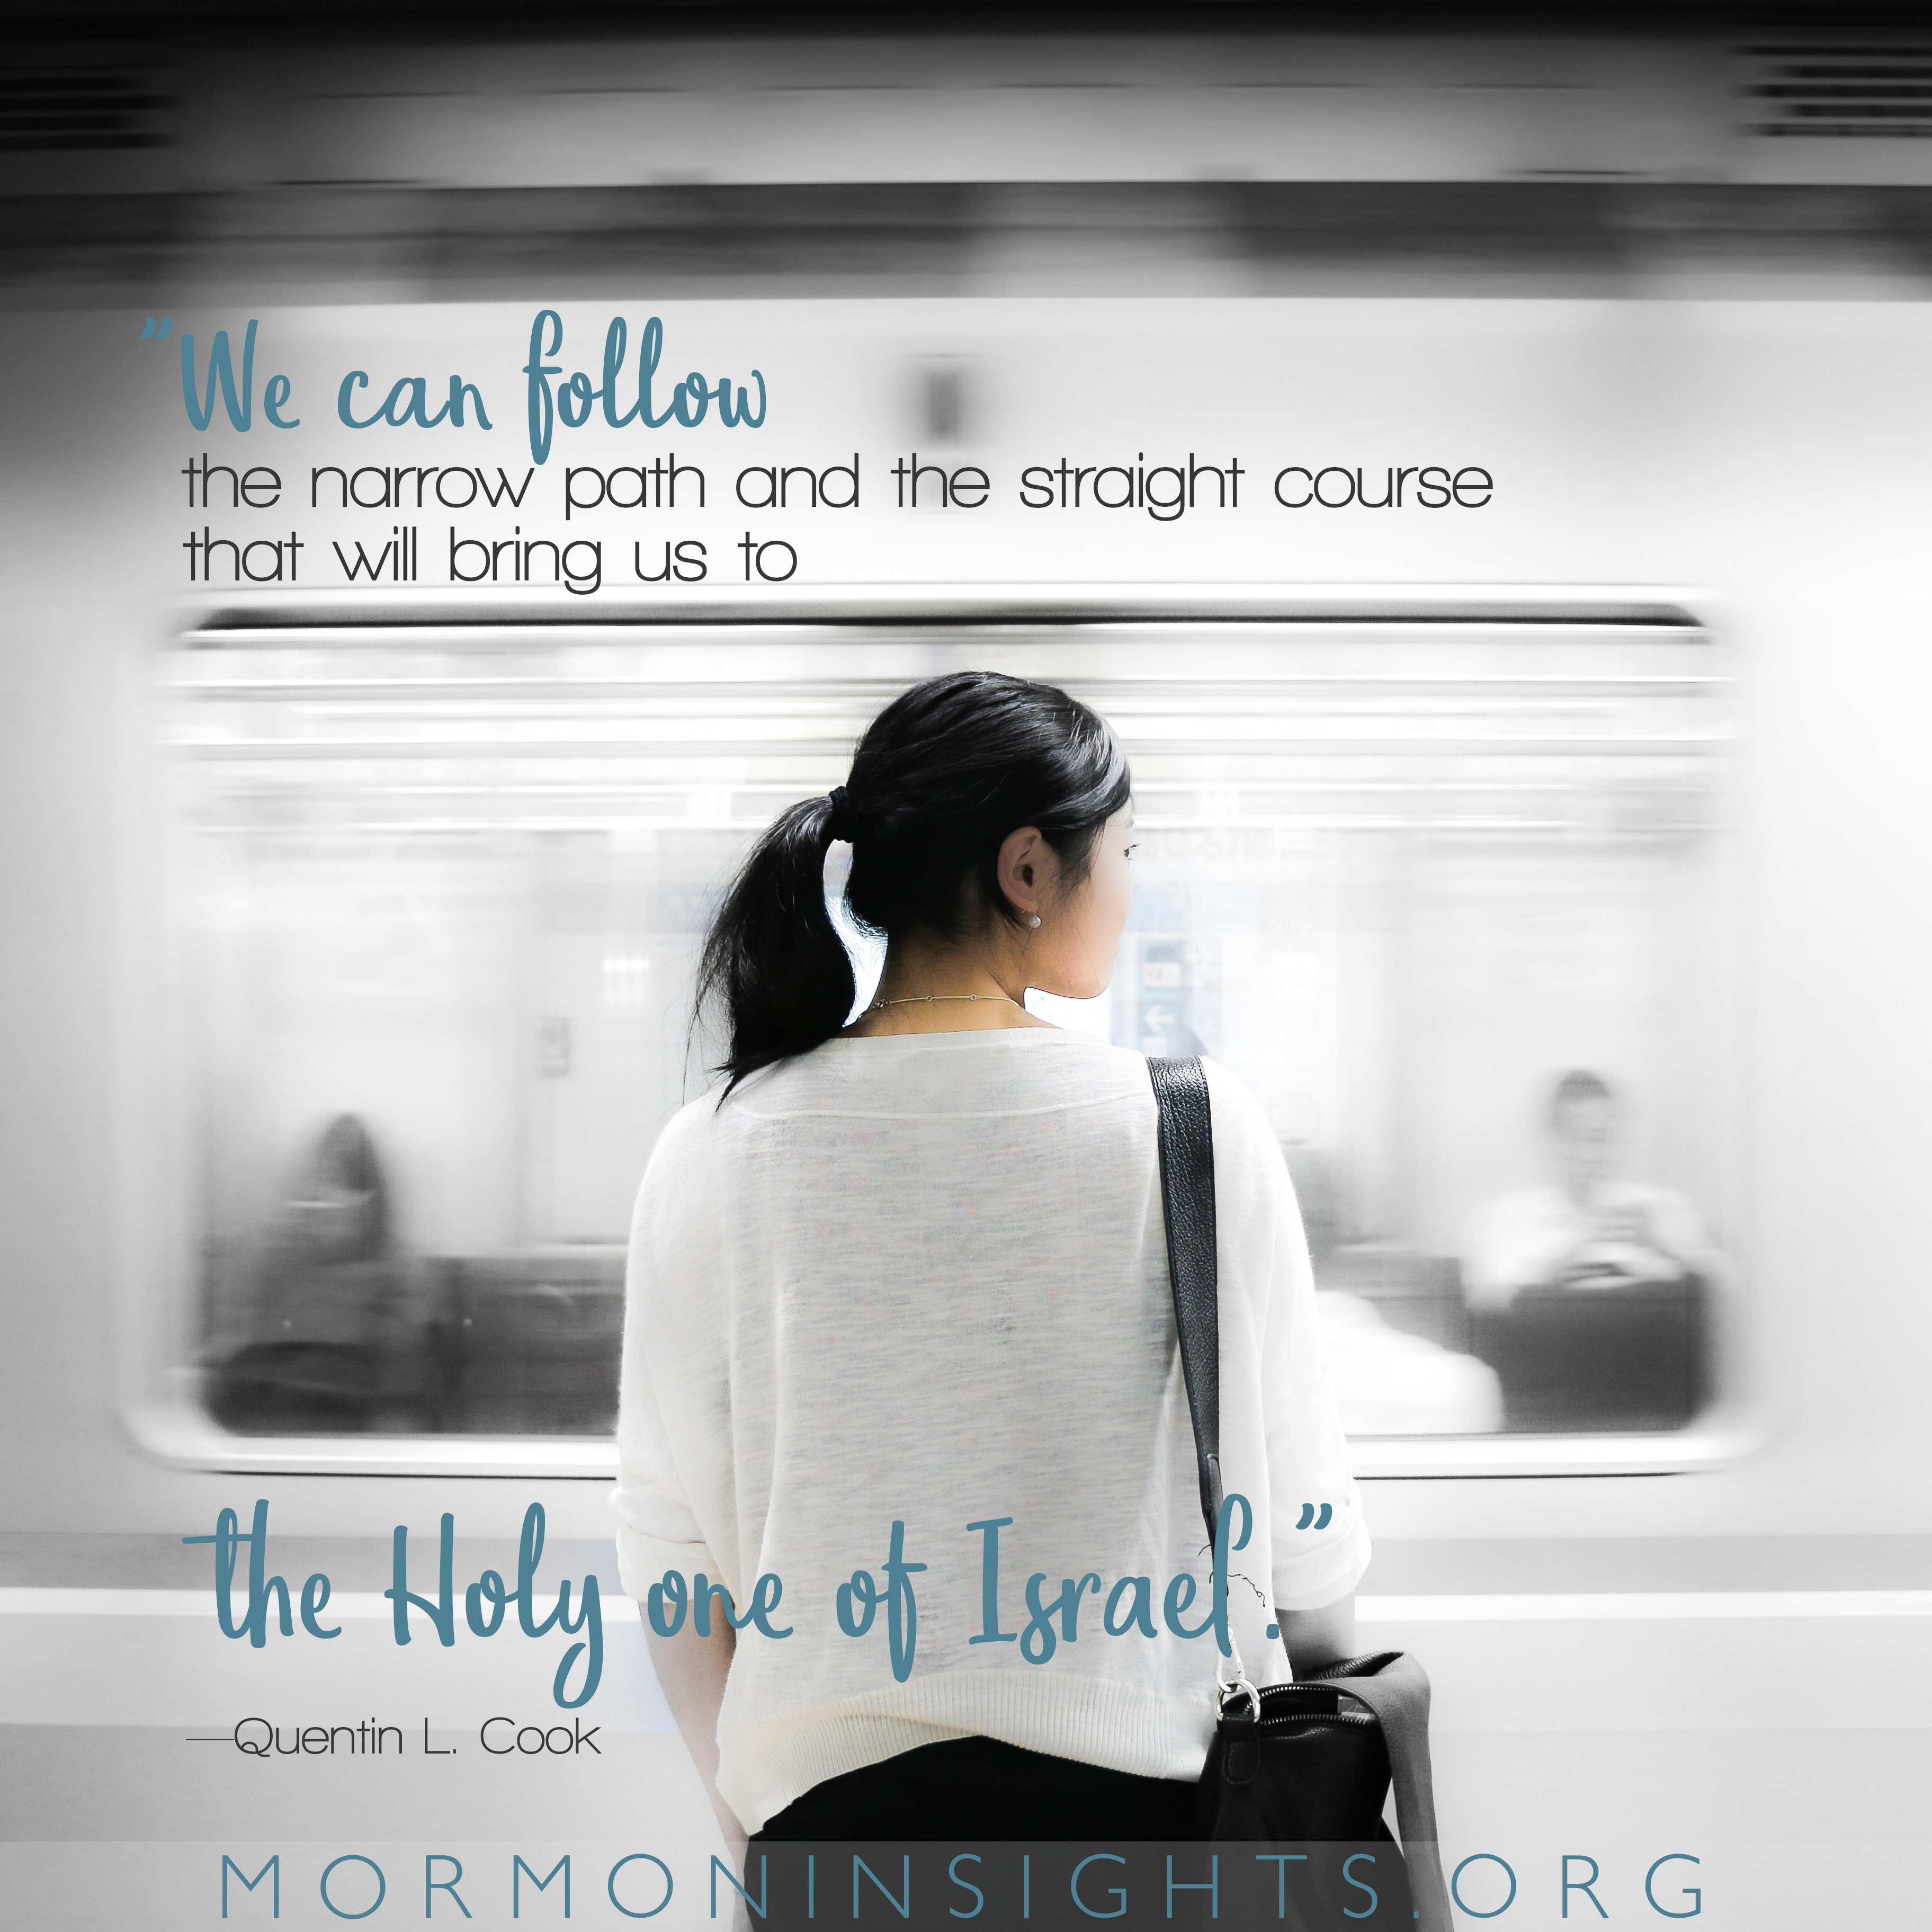 "We can follow the narrow and the straight course that will bring us to the Holy one of Israel."